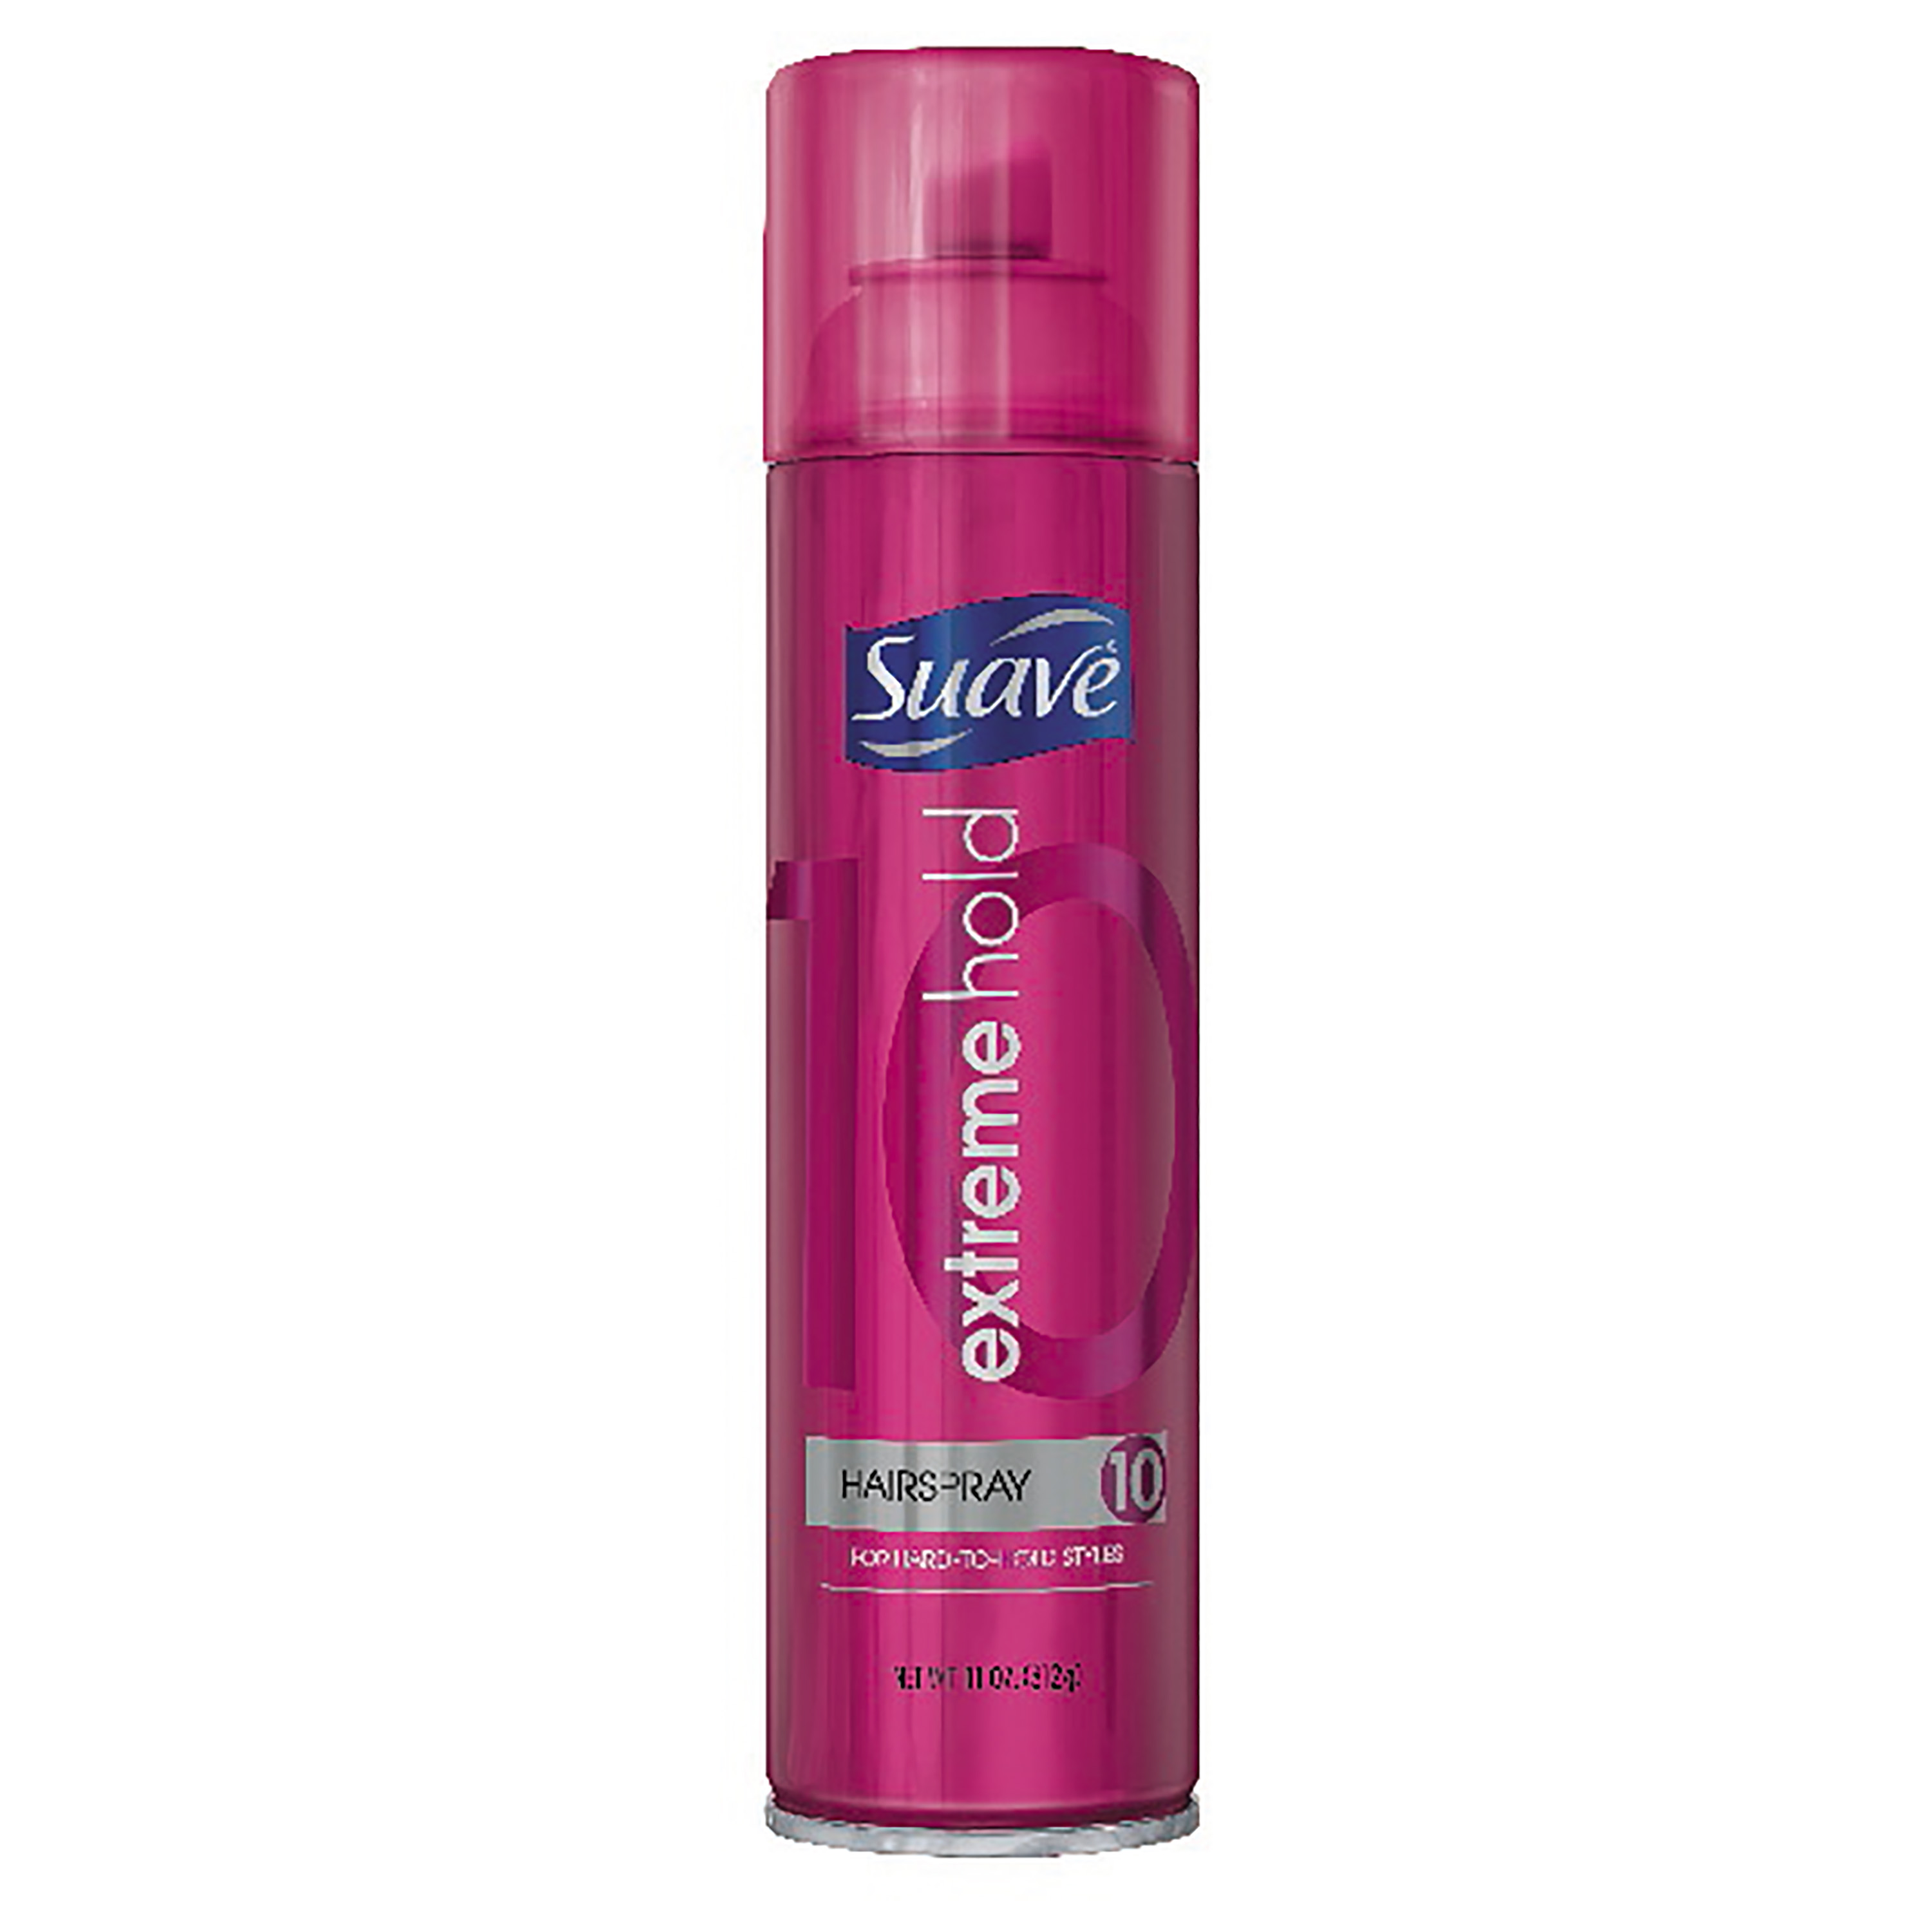 Suave Hairspray Extreme Hold Hair Styling Product 11 oz - image 2 of 8